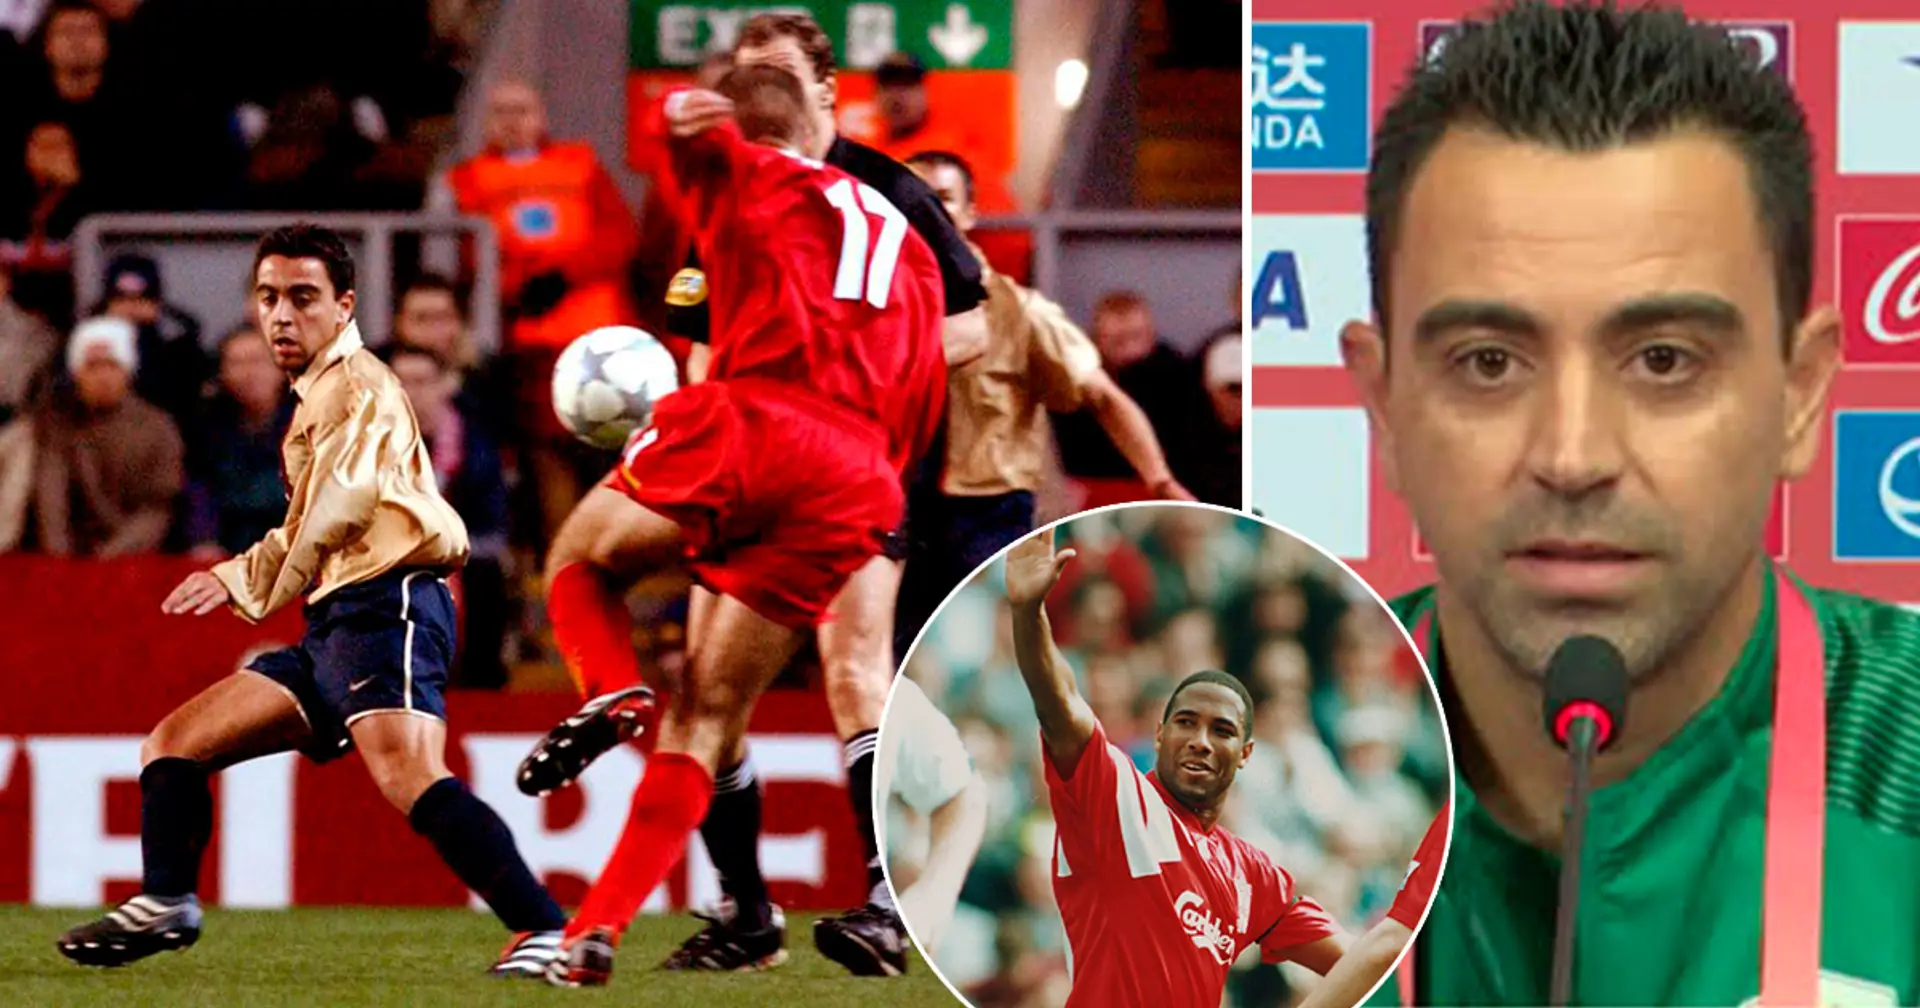 'I couldn't believe it': Xavi reveals how playing Liverpool at Anfield left him speechless